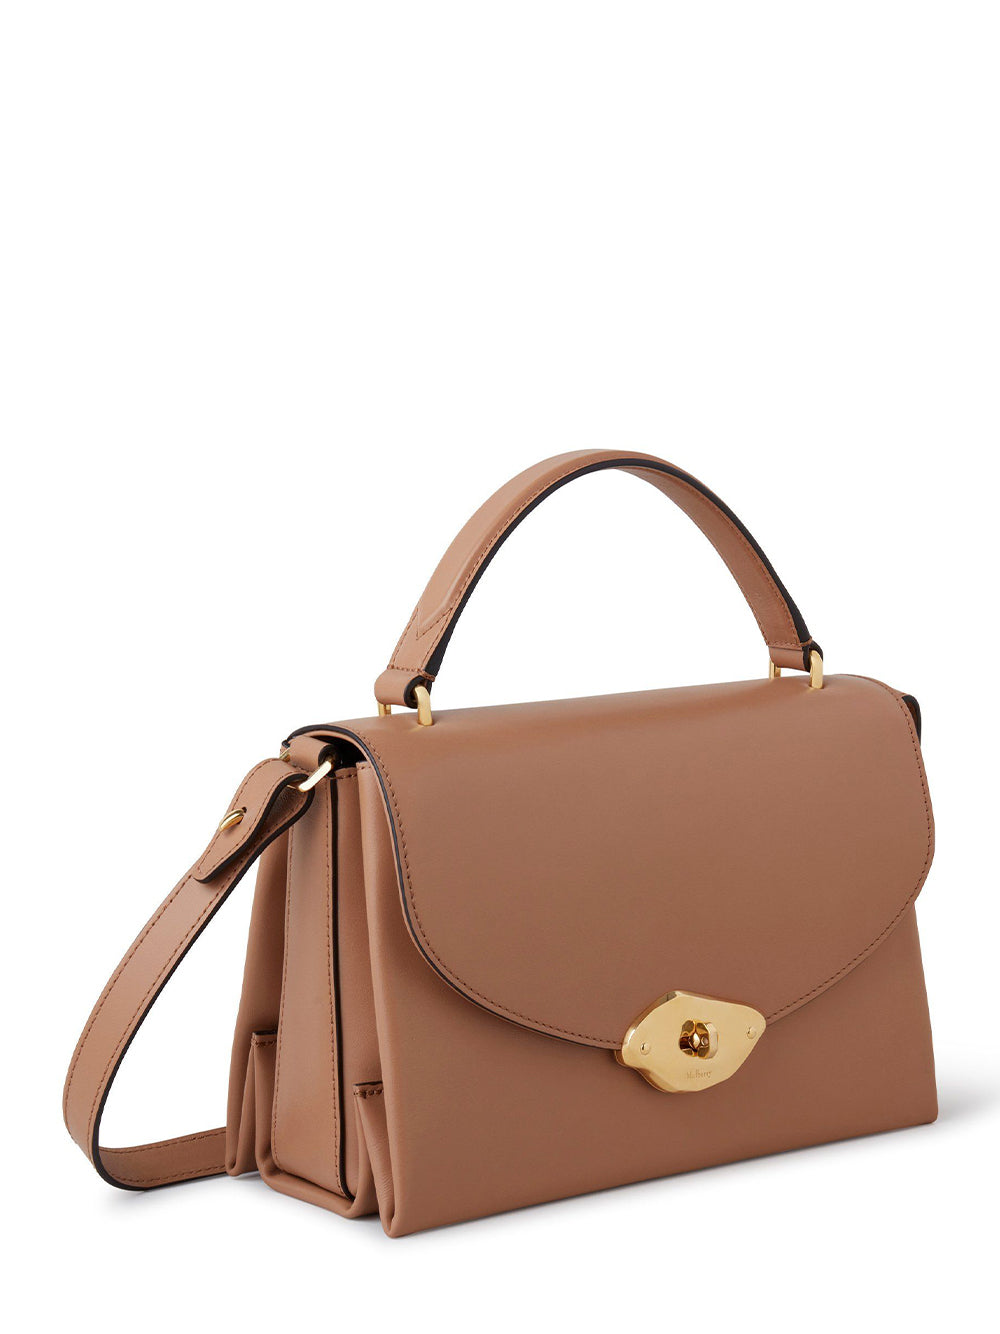 Mulberry-LanaTopHandle-SableHighGlossLeather-3